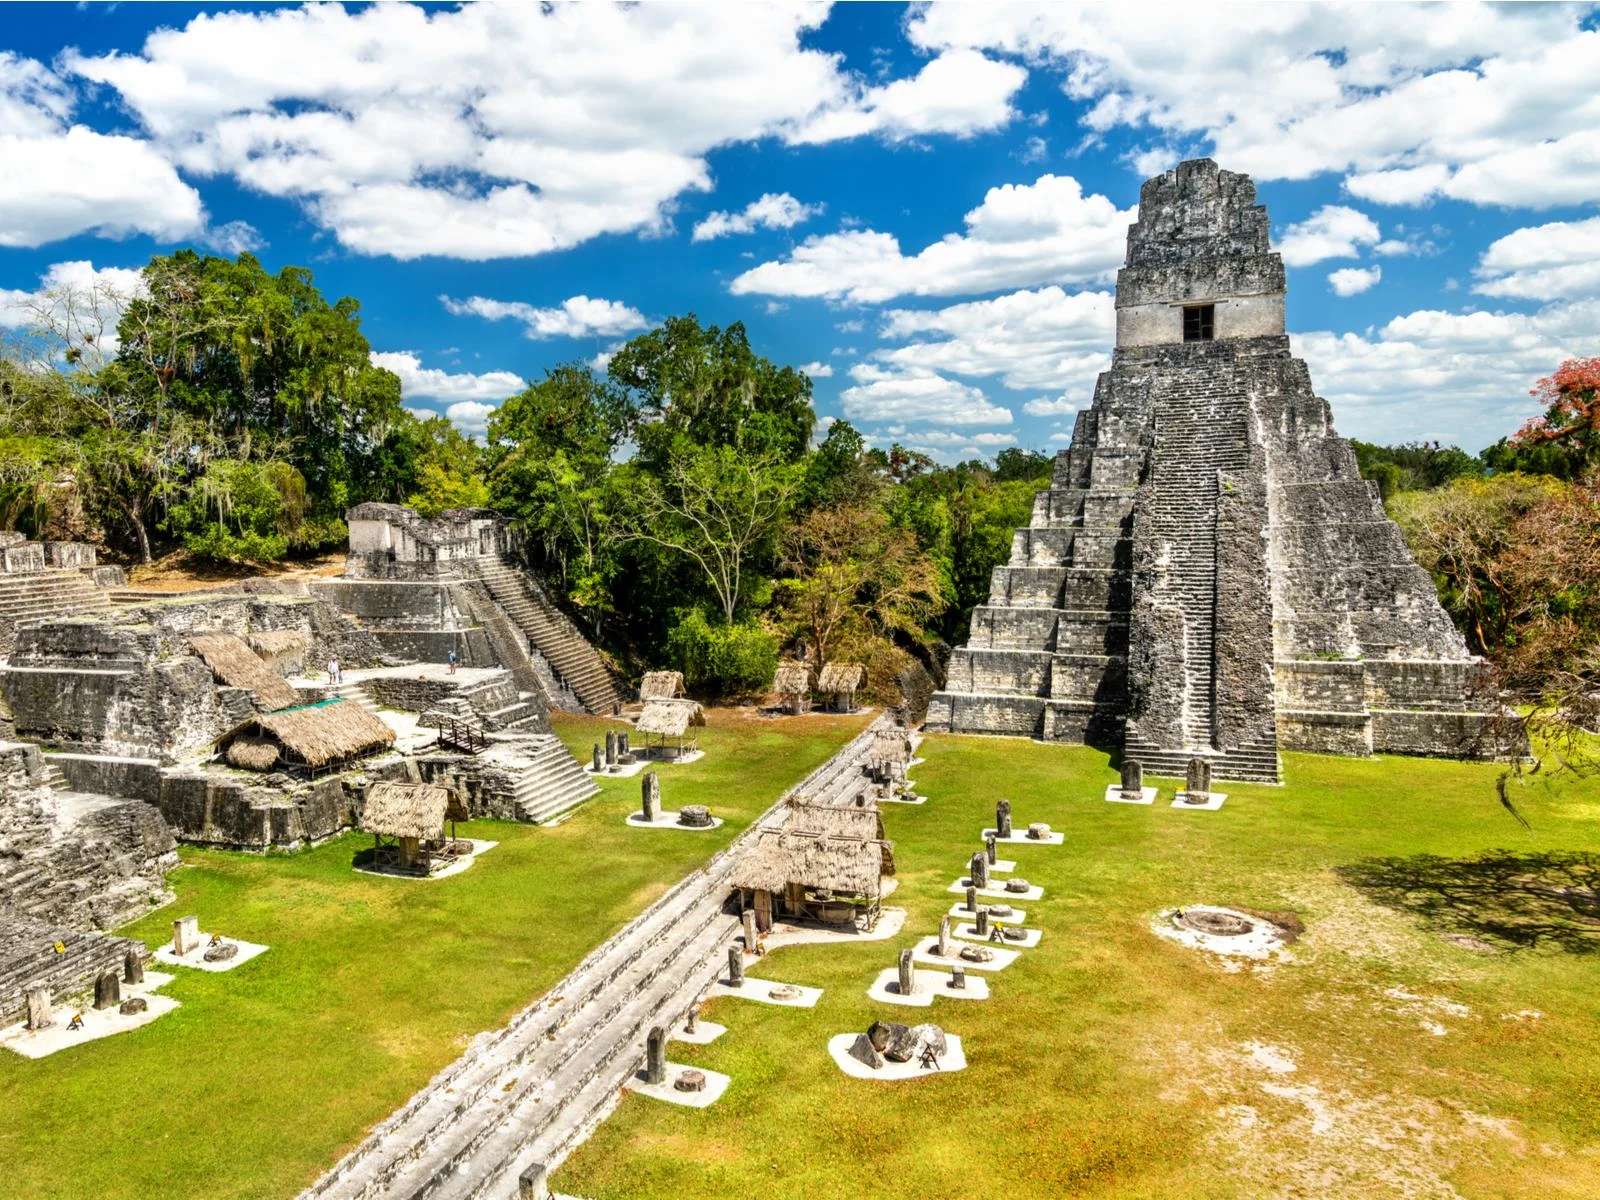 For a piece on is Guatemala Safe, Temple of the Great Jaguar at Tikal